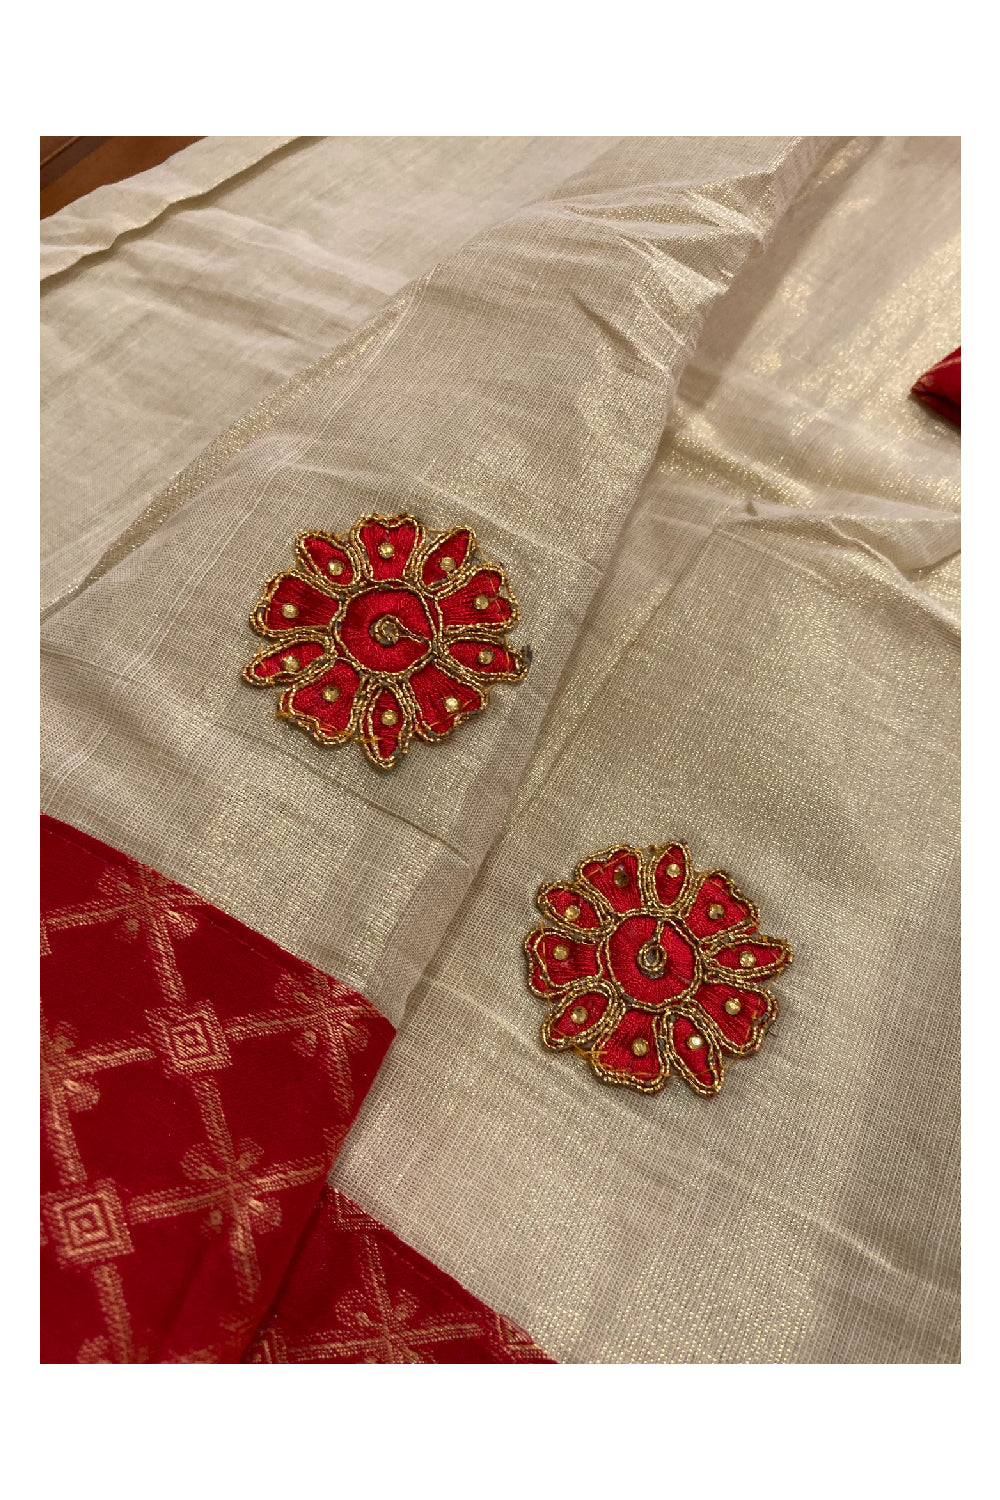 Kerala Tissue Stitched Dhavani Set with Blouse Piece and Neriyathu in with Red Accents